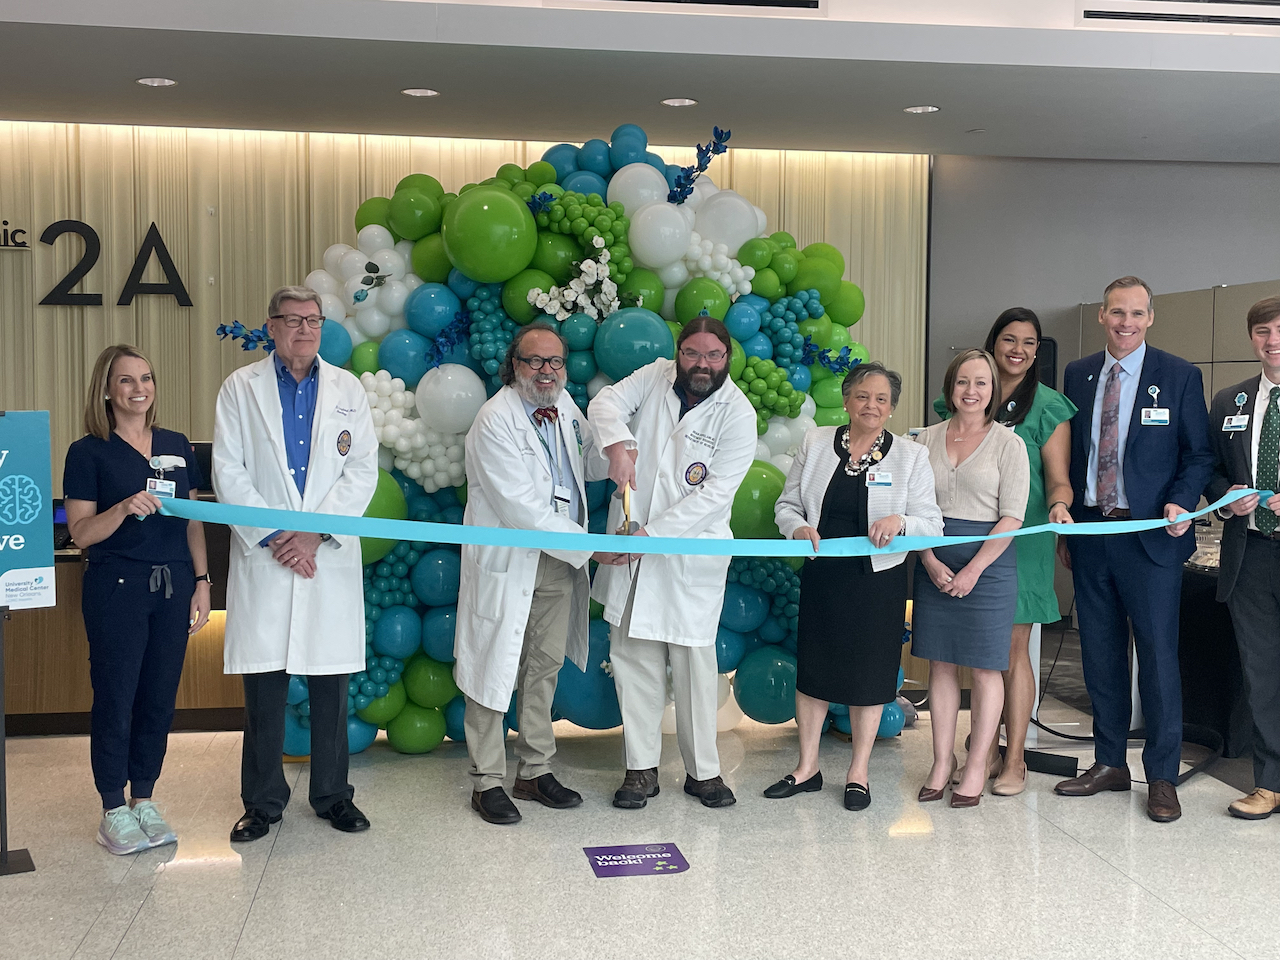 This image shows a group of people cutting the ribbon on a new clinic space